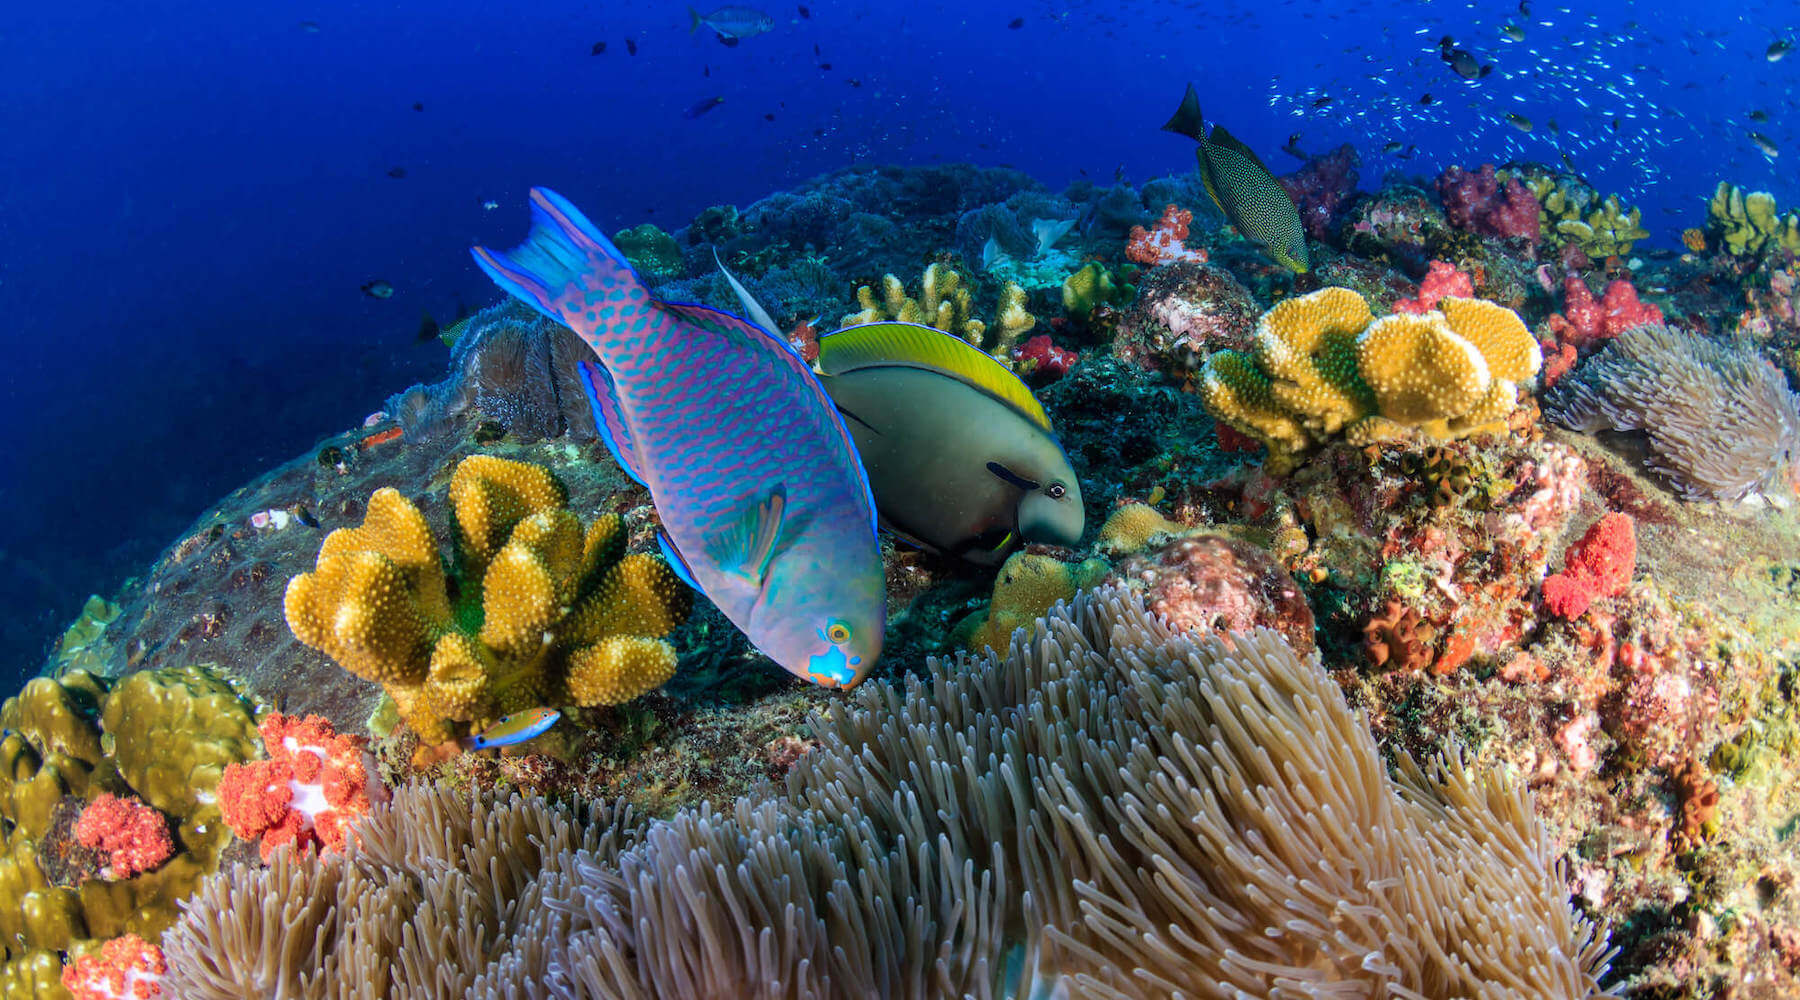 Parrotfish & Protecting Coral Reef Ecosystems